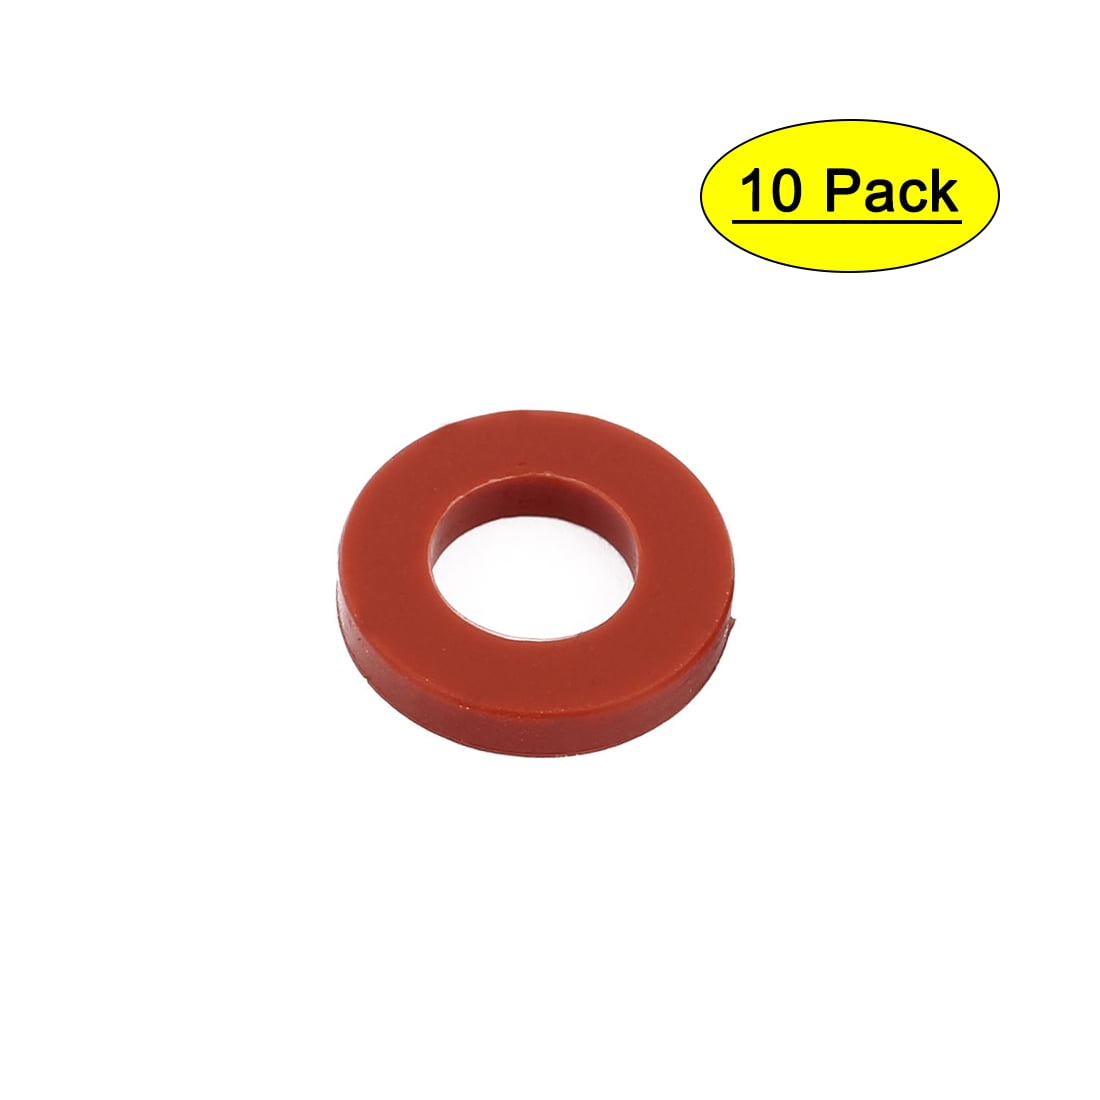 Details about   5 Pcs 18mm x 40mm x 3mm O-Ring Hose Gasket Silicone Washer SN-A 